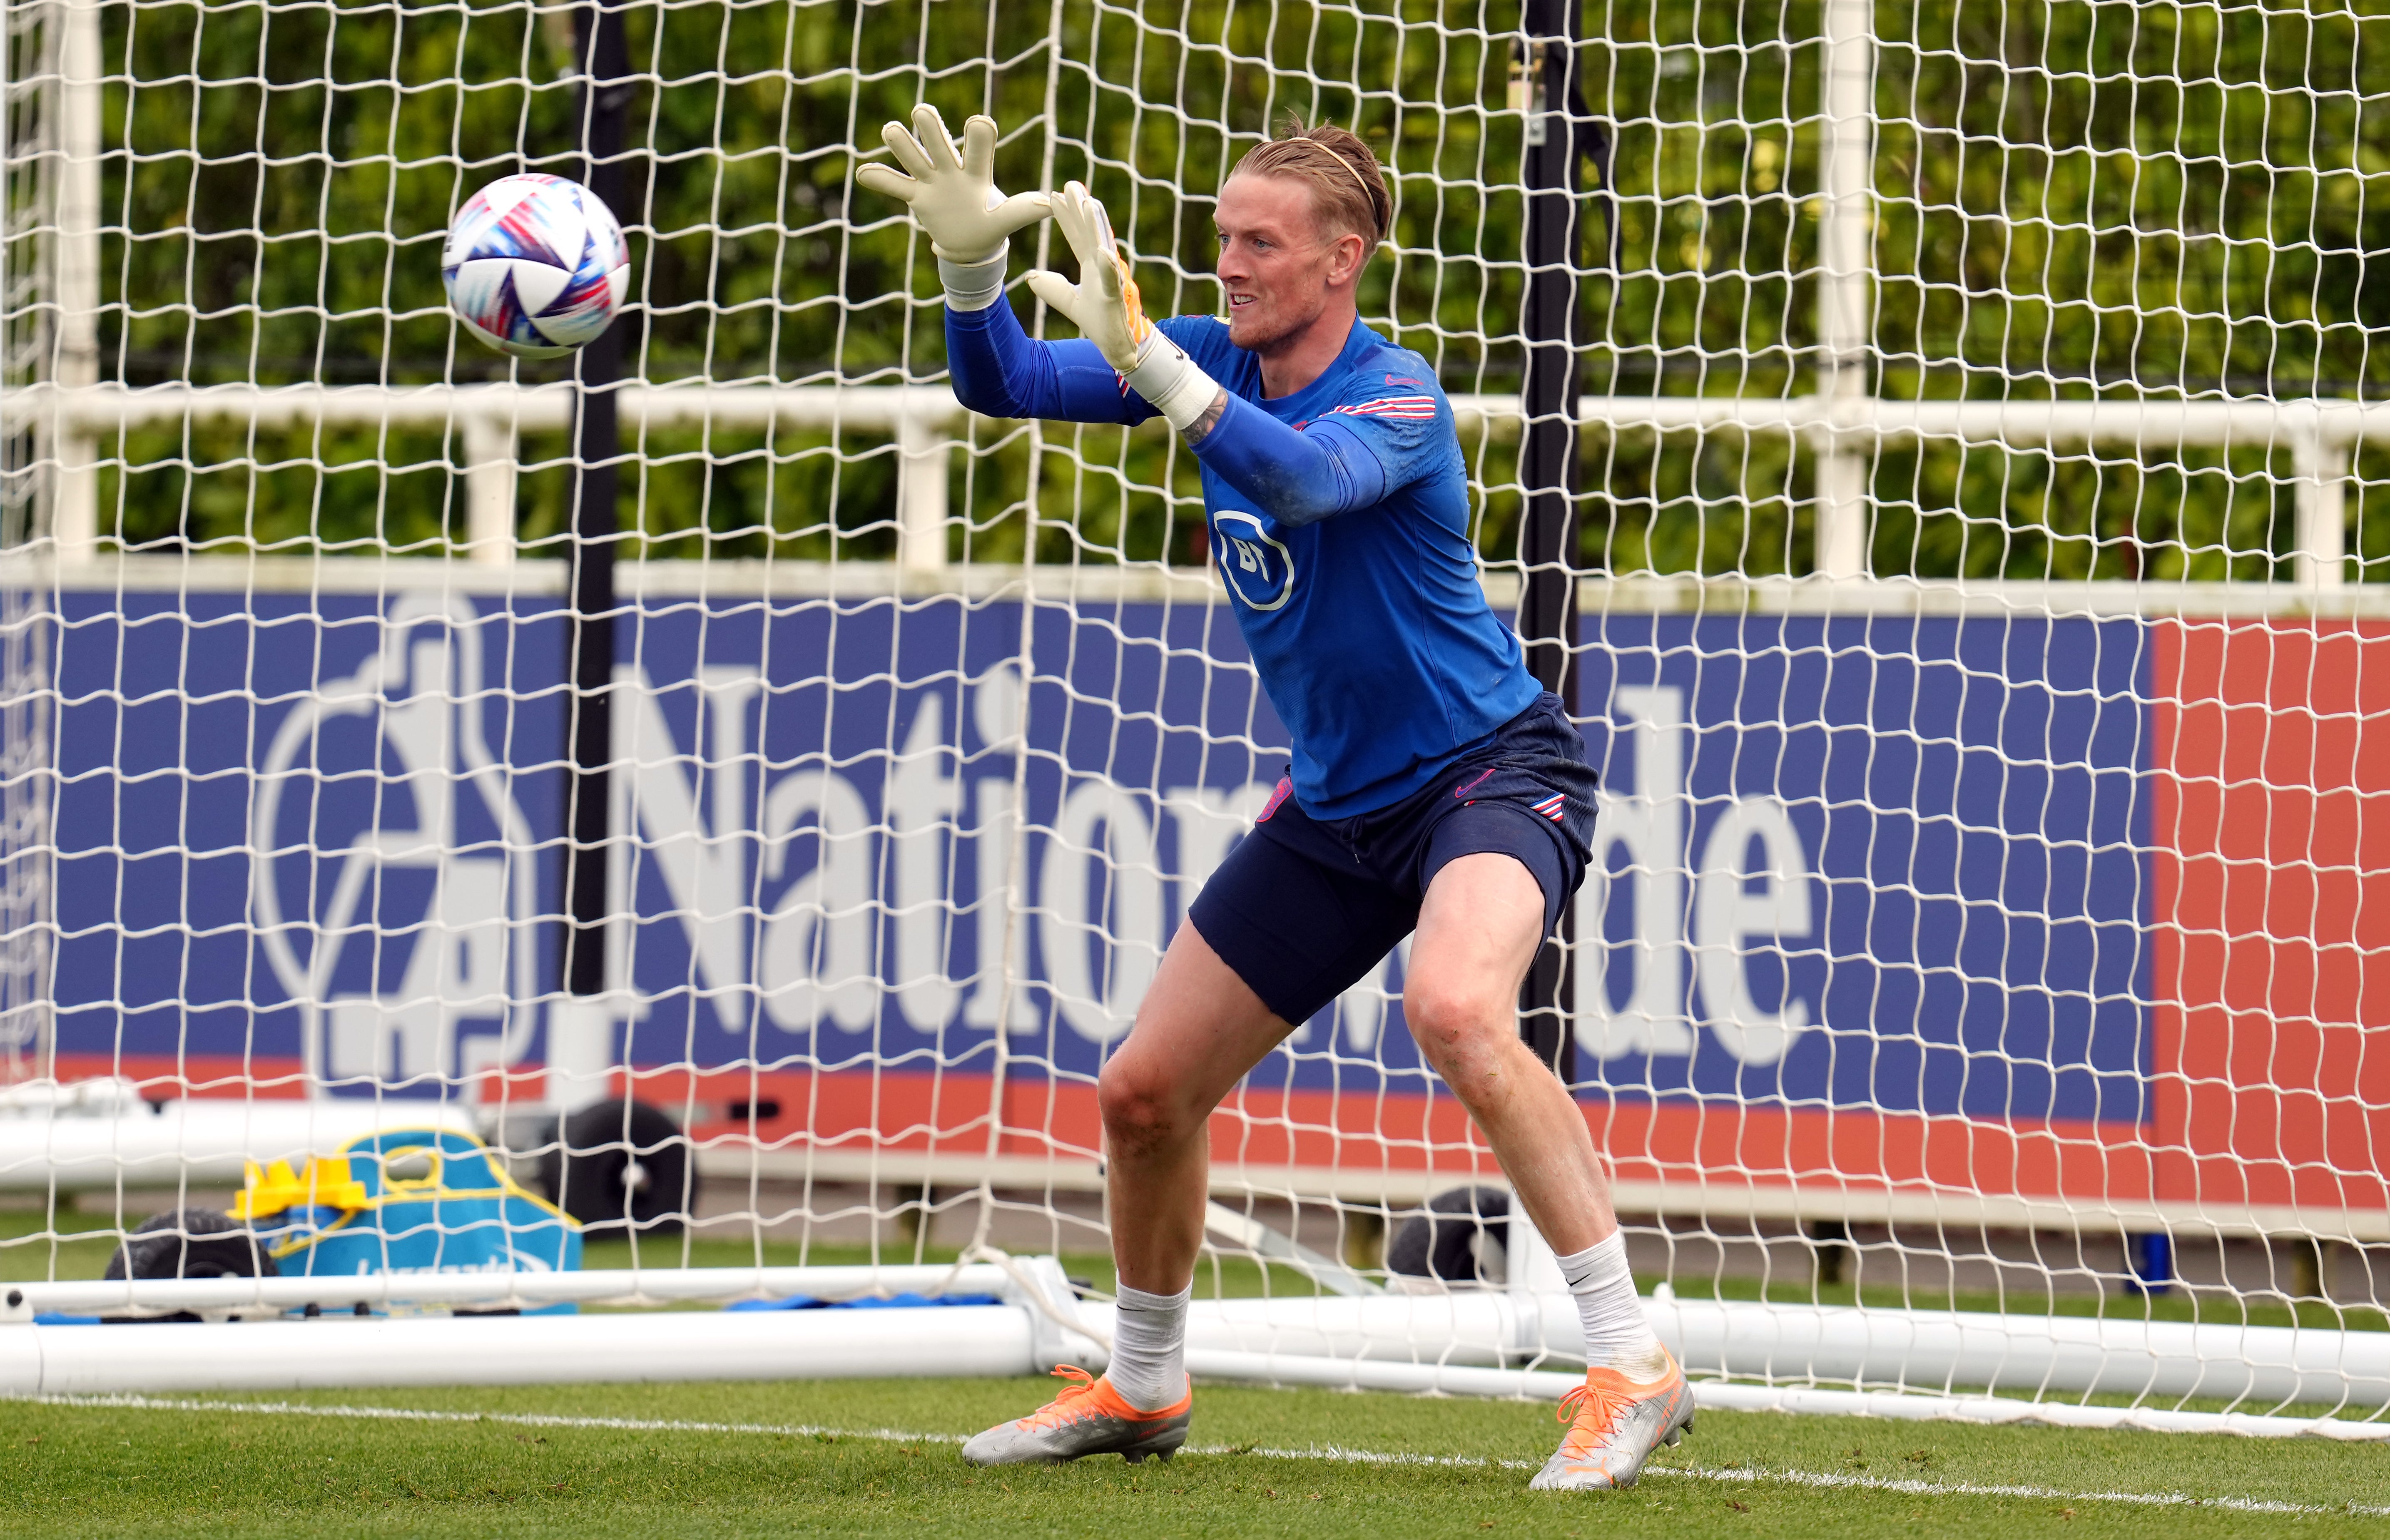 Jordan Pickford is expected to be England’s number one in Qatar (nick Potts/PA)